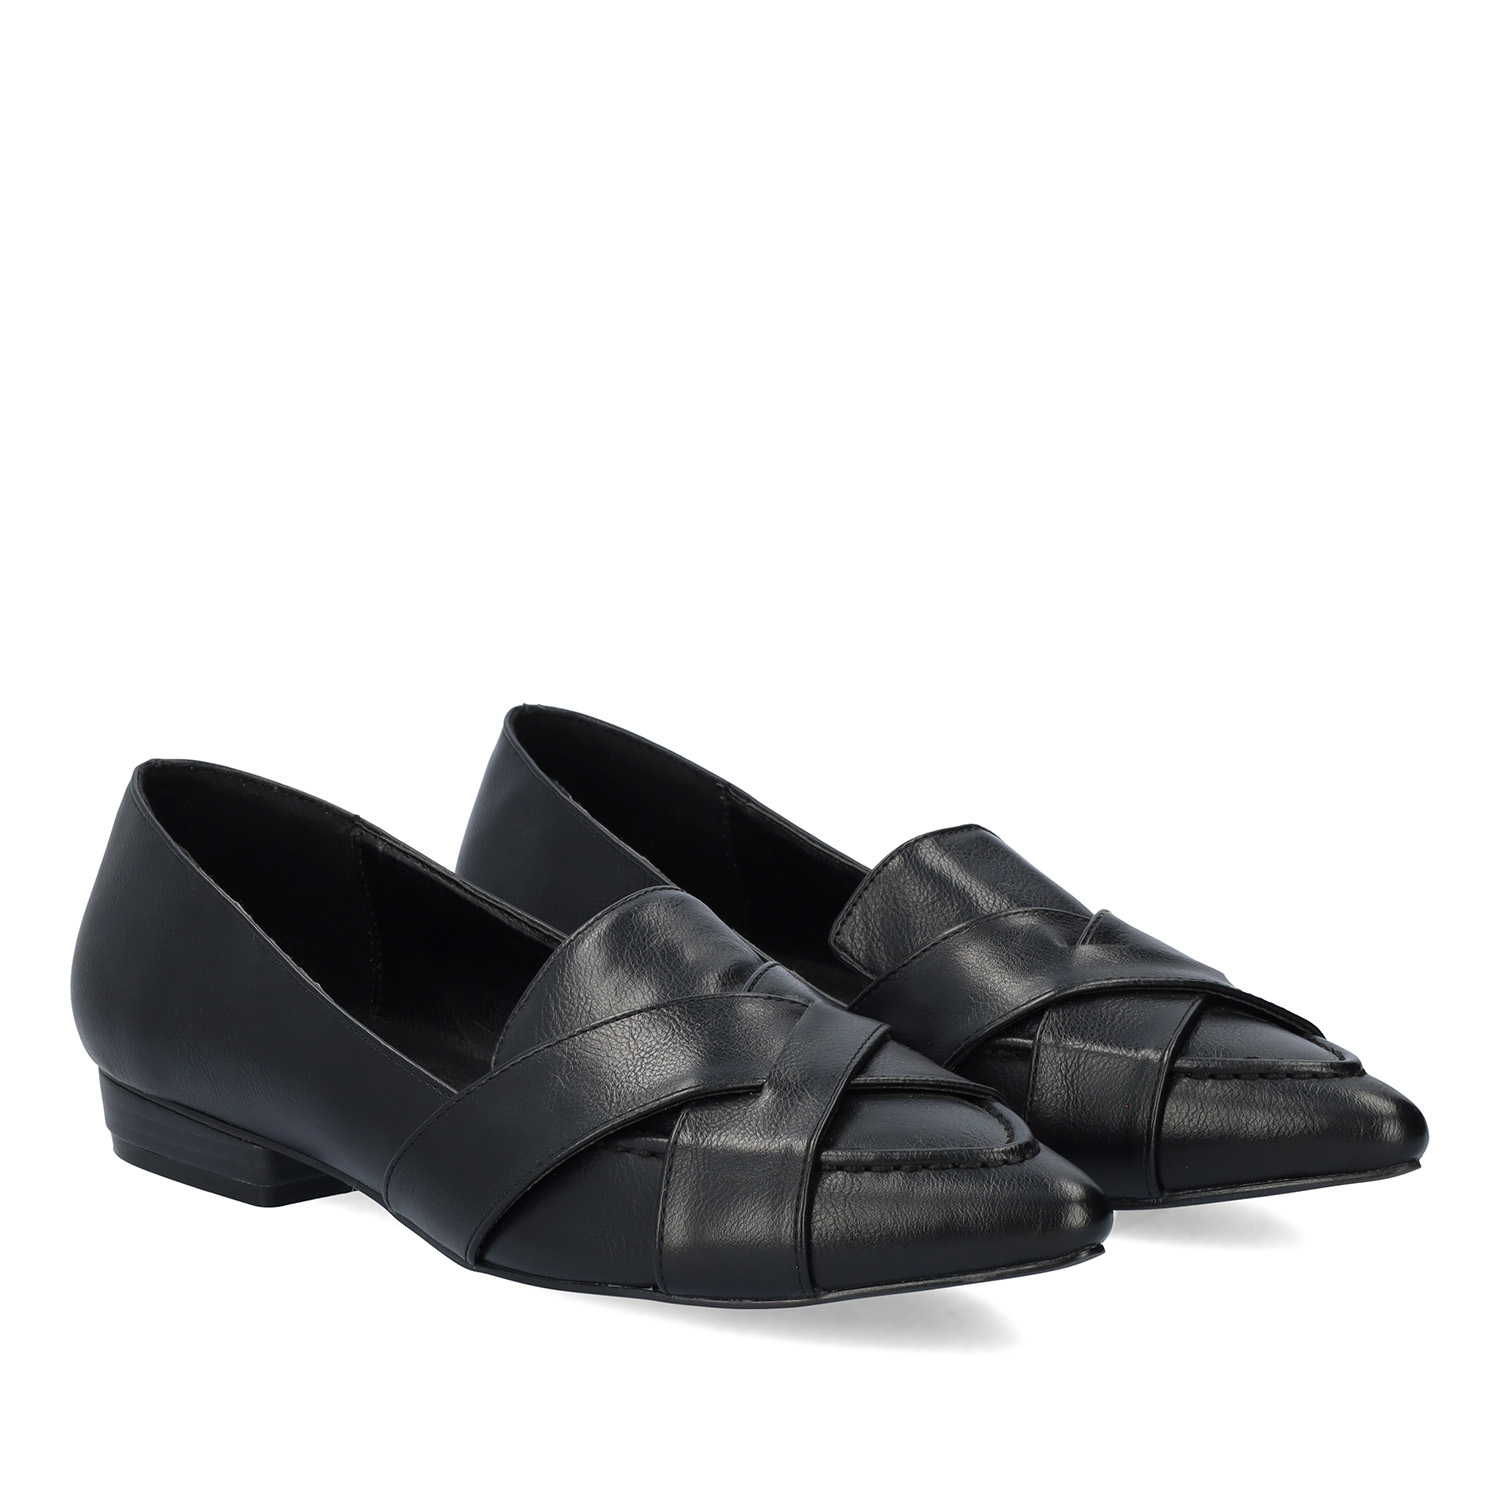 Pointed toe loafers in black faux leather 